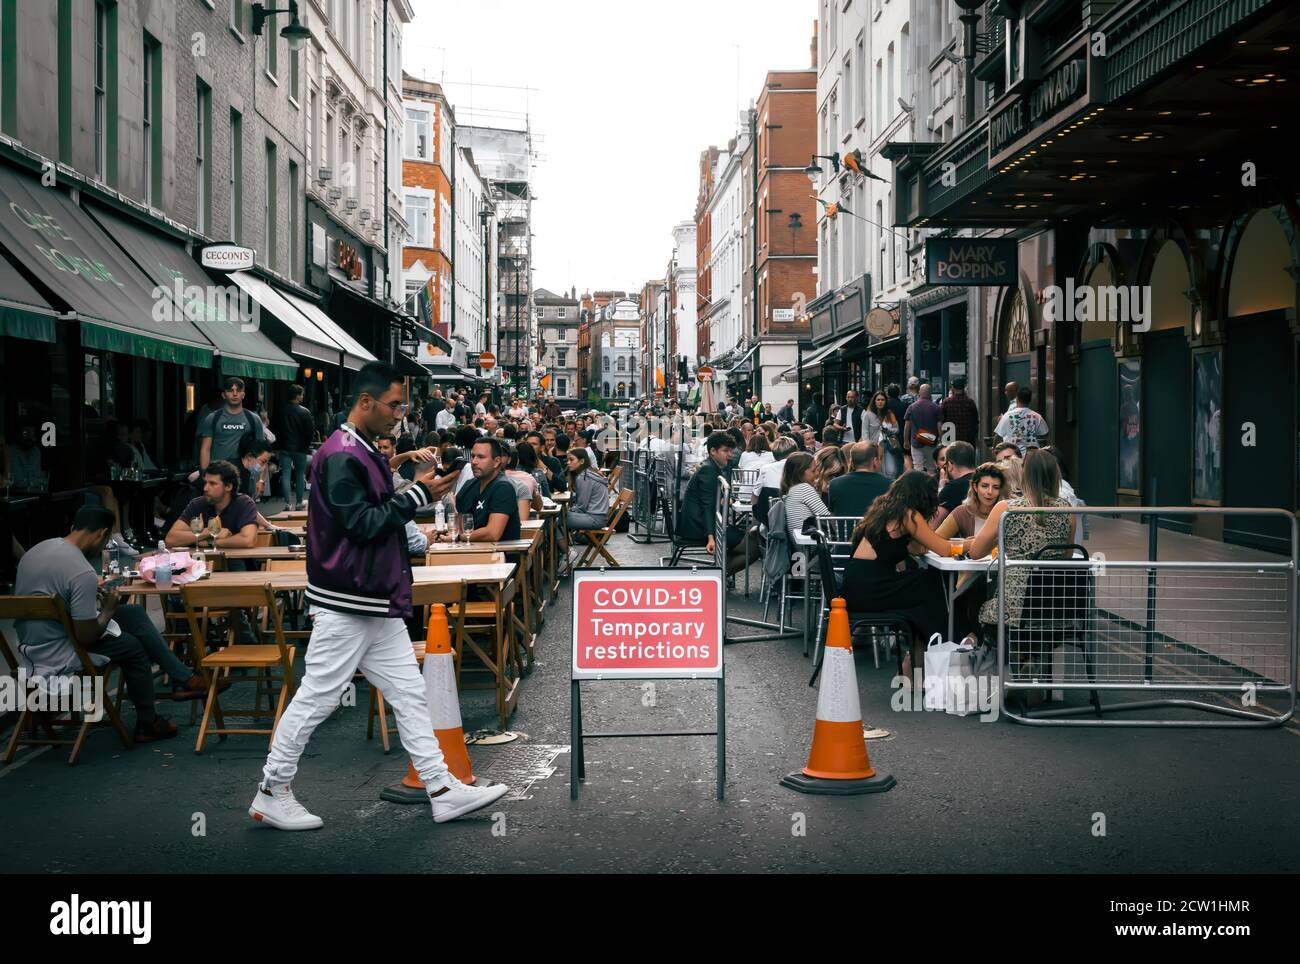 London - 22 August 2020 - View of Red Covid-19 Temporary Restriction Sign in Crowded Location in Soho, London UK Stock Photo